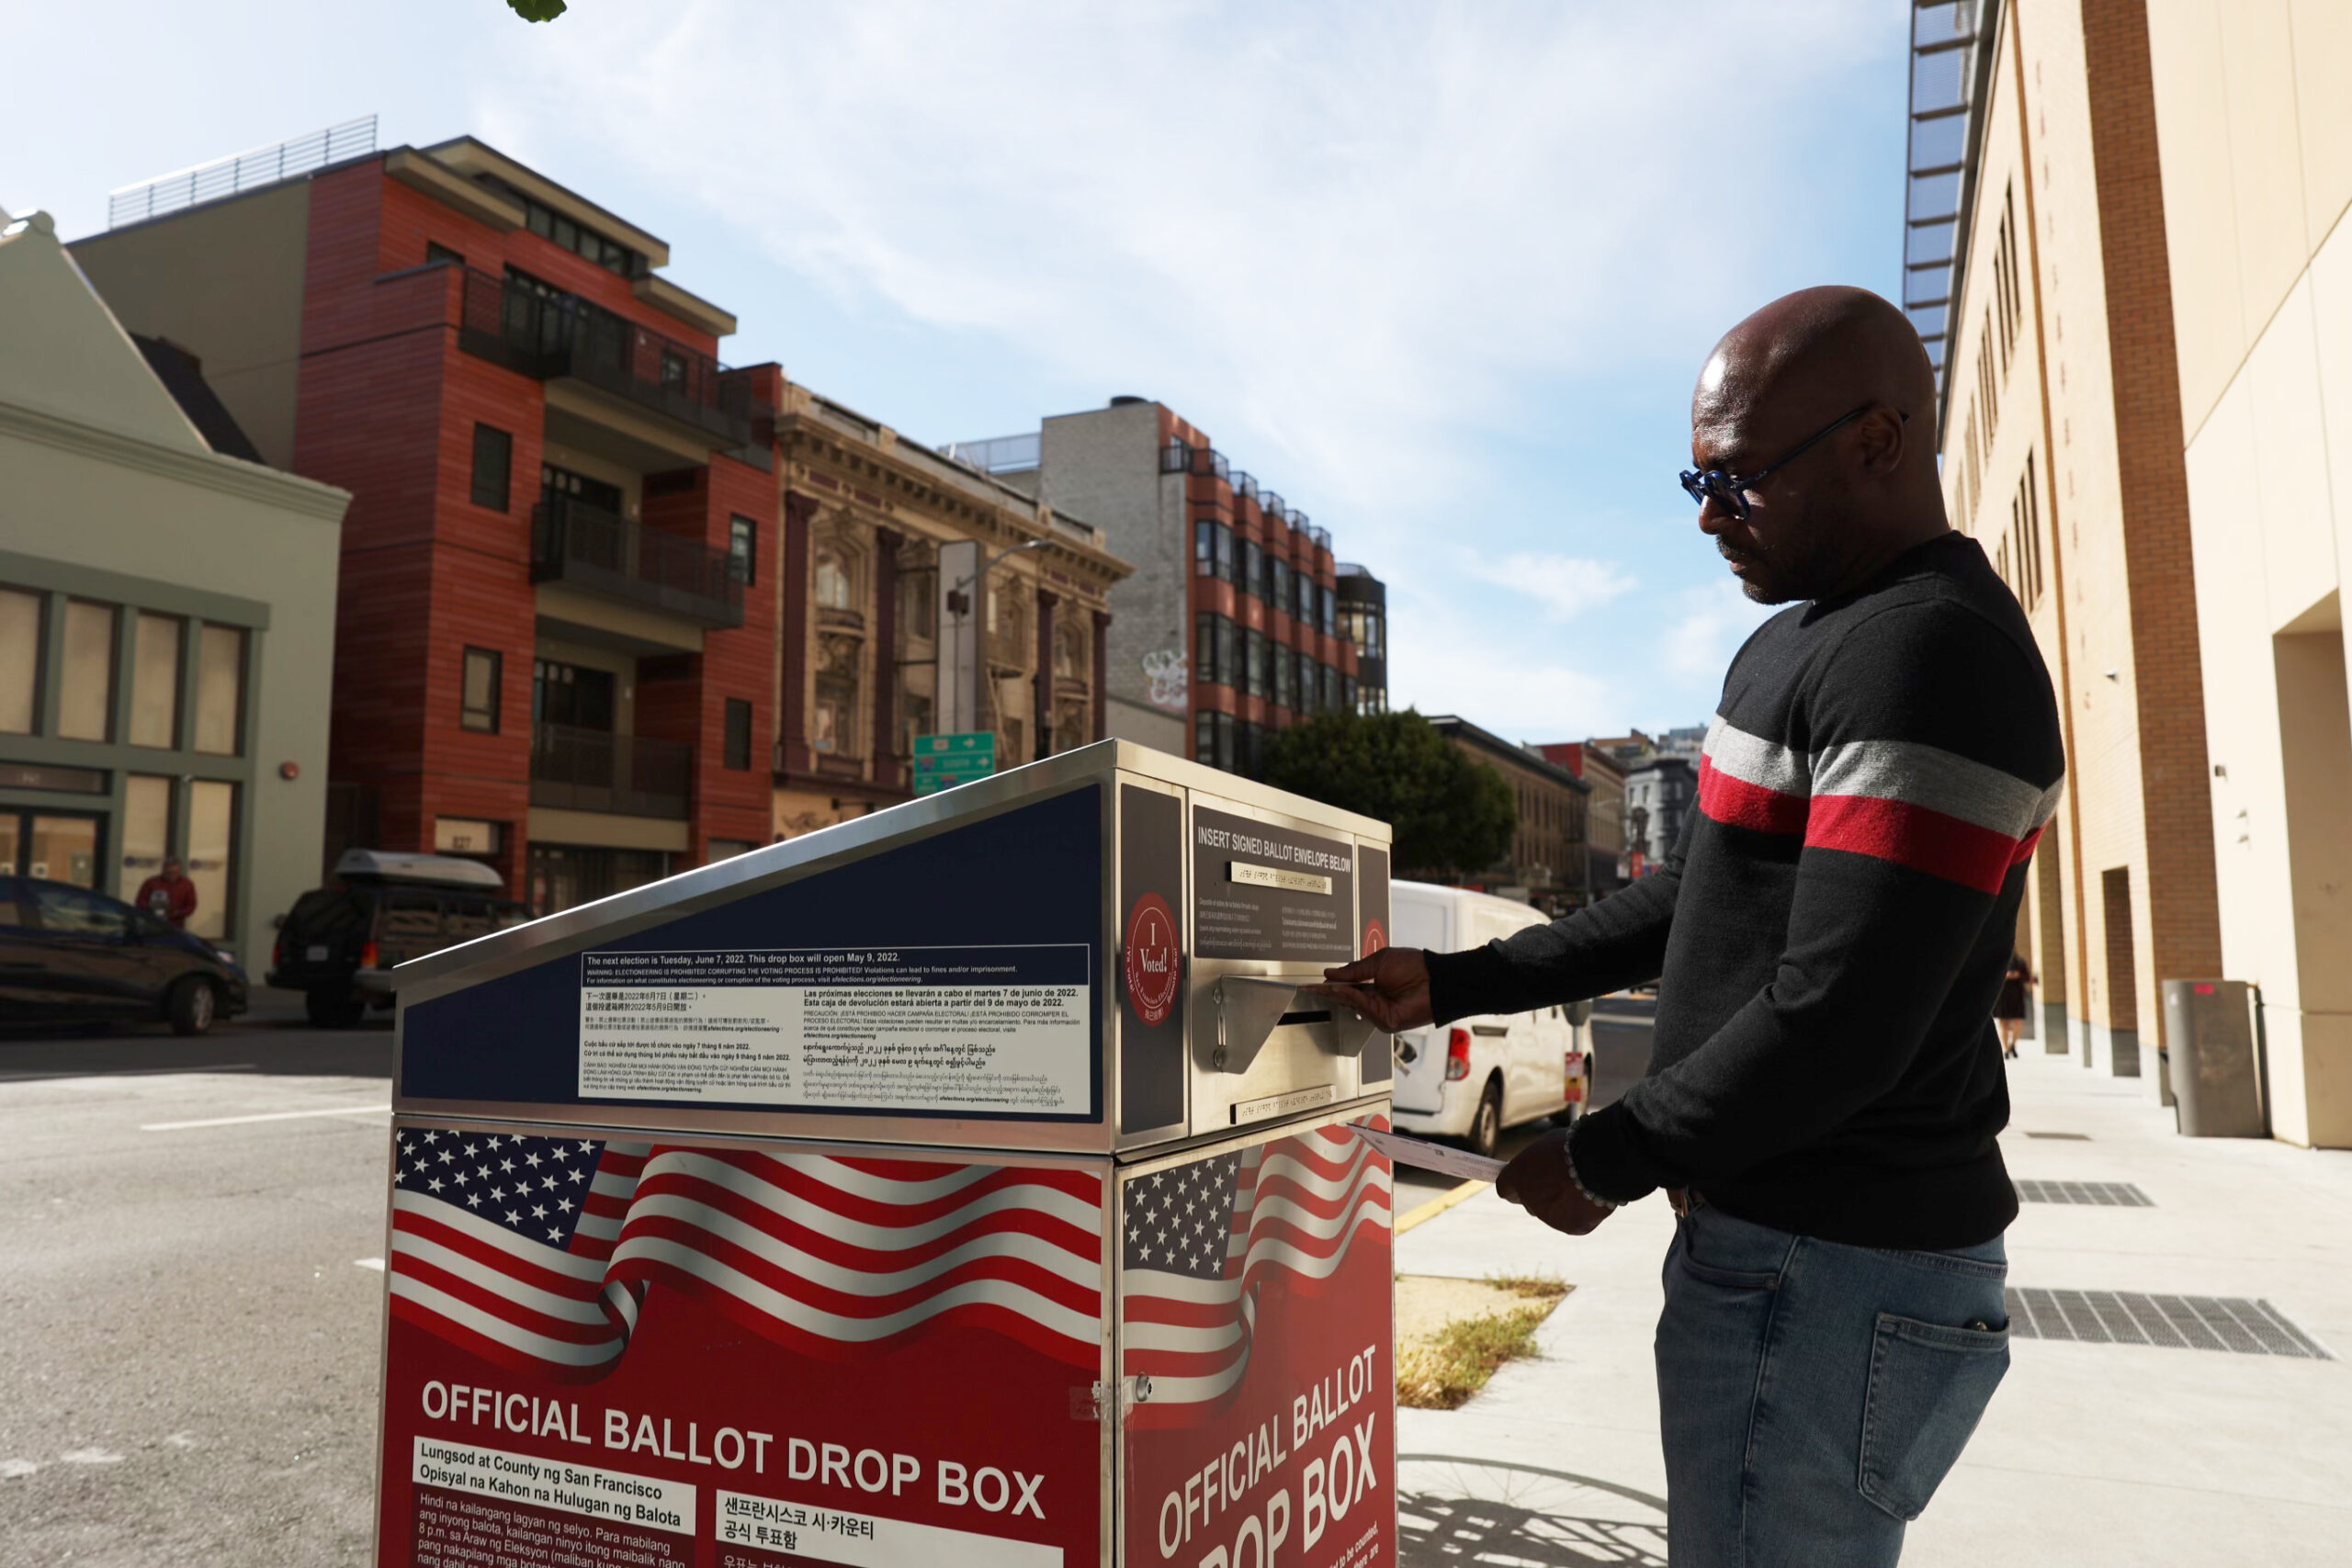 A man wearing sunglasses prepares to insert his ballot into a drop box on a sunny San Francisco street.